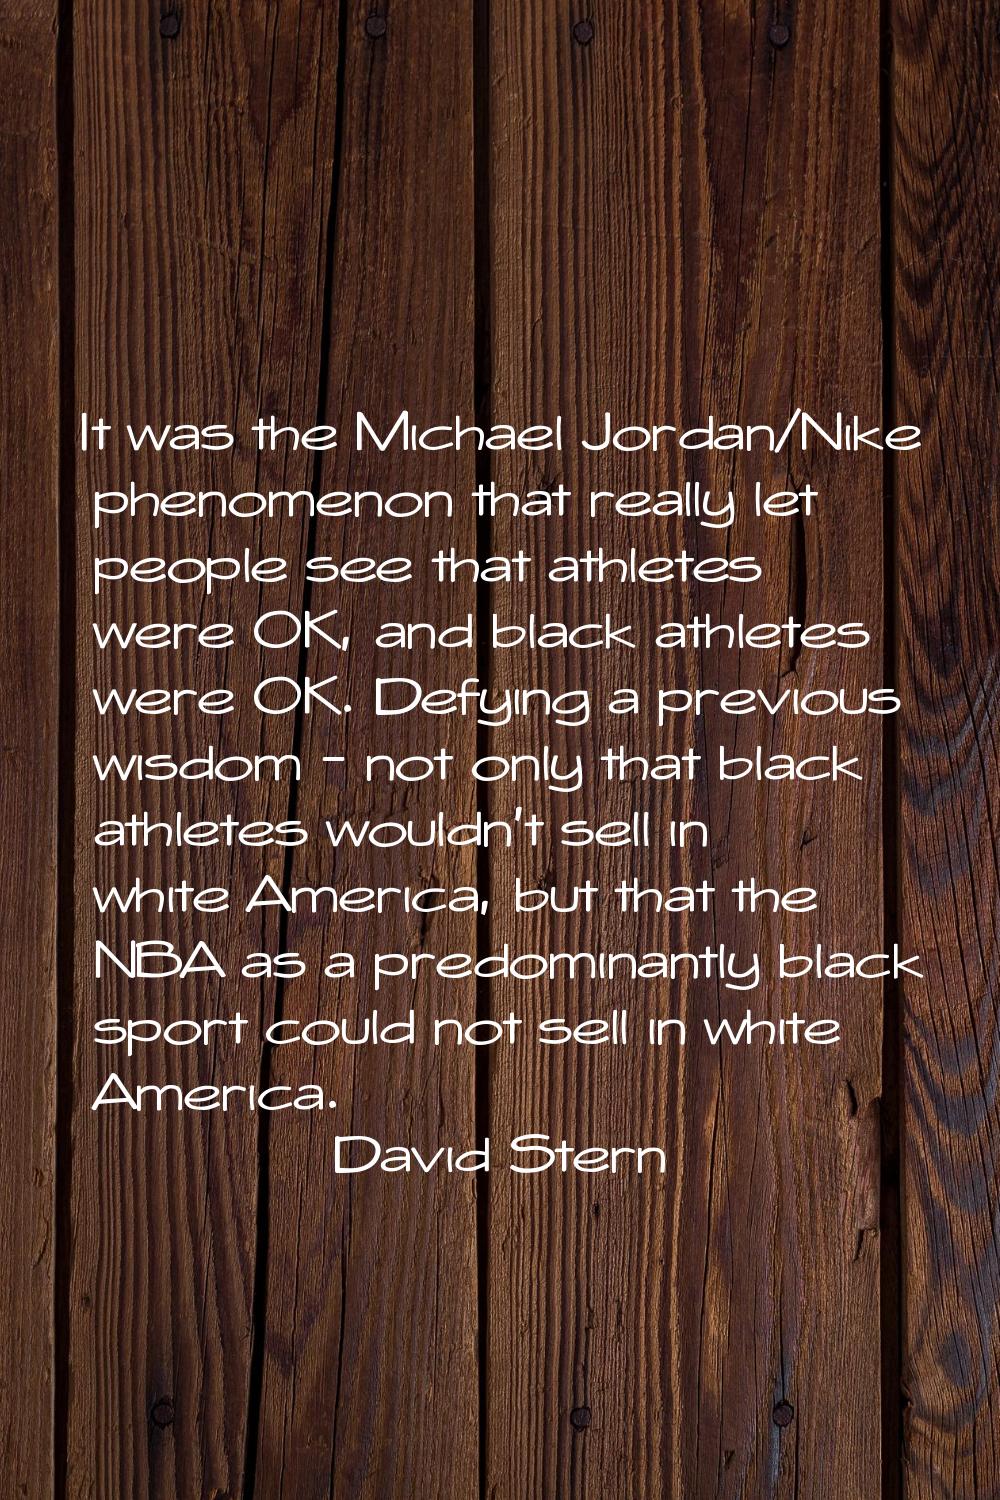 It was the Michael Jordan/Nike phenomenon that really let people see that athletes were OK, and bla